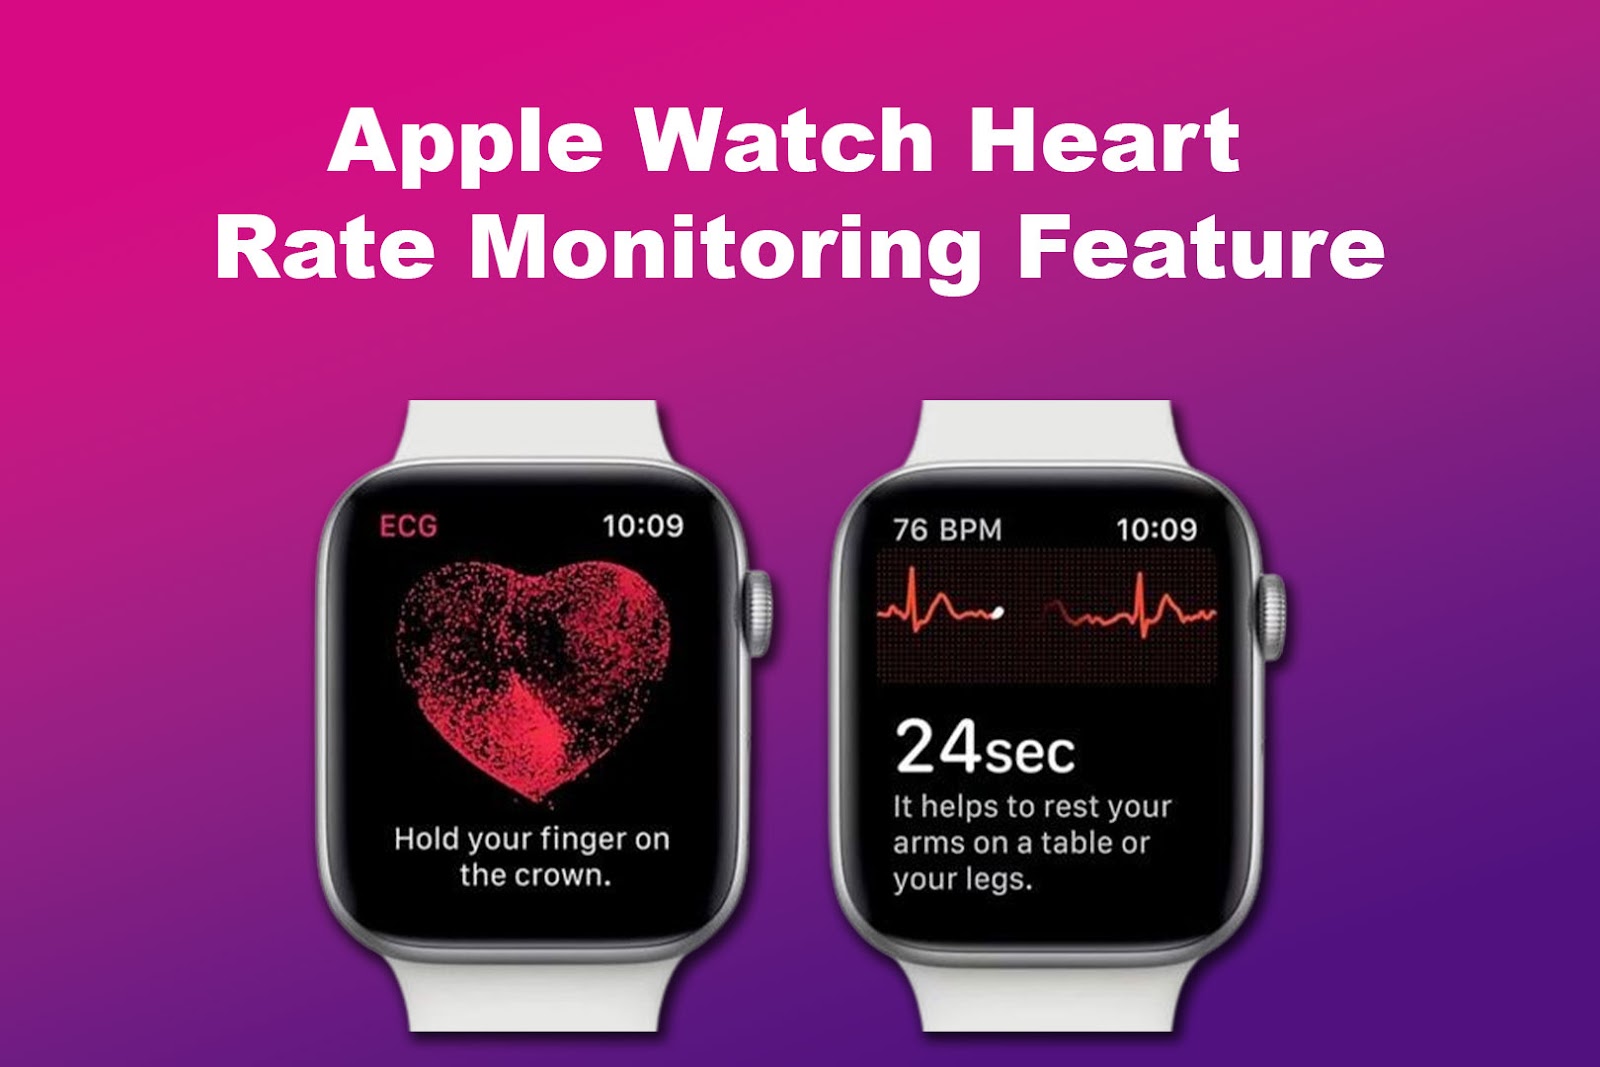 Apple Watch Heart Rate Monitoring Feature